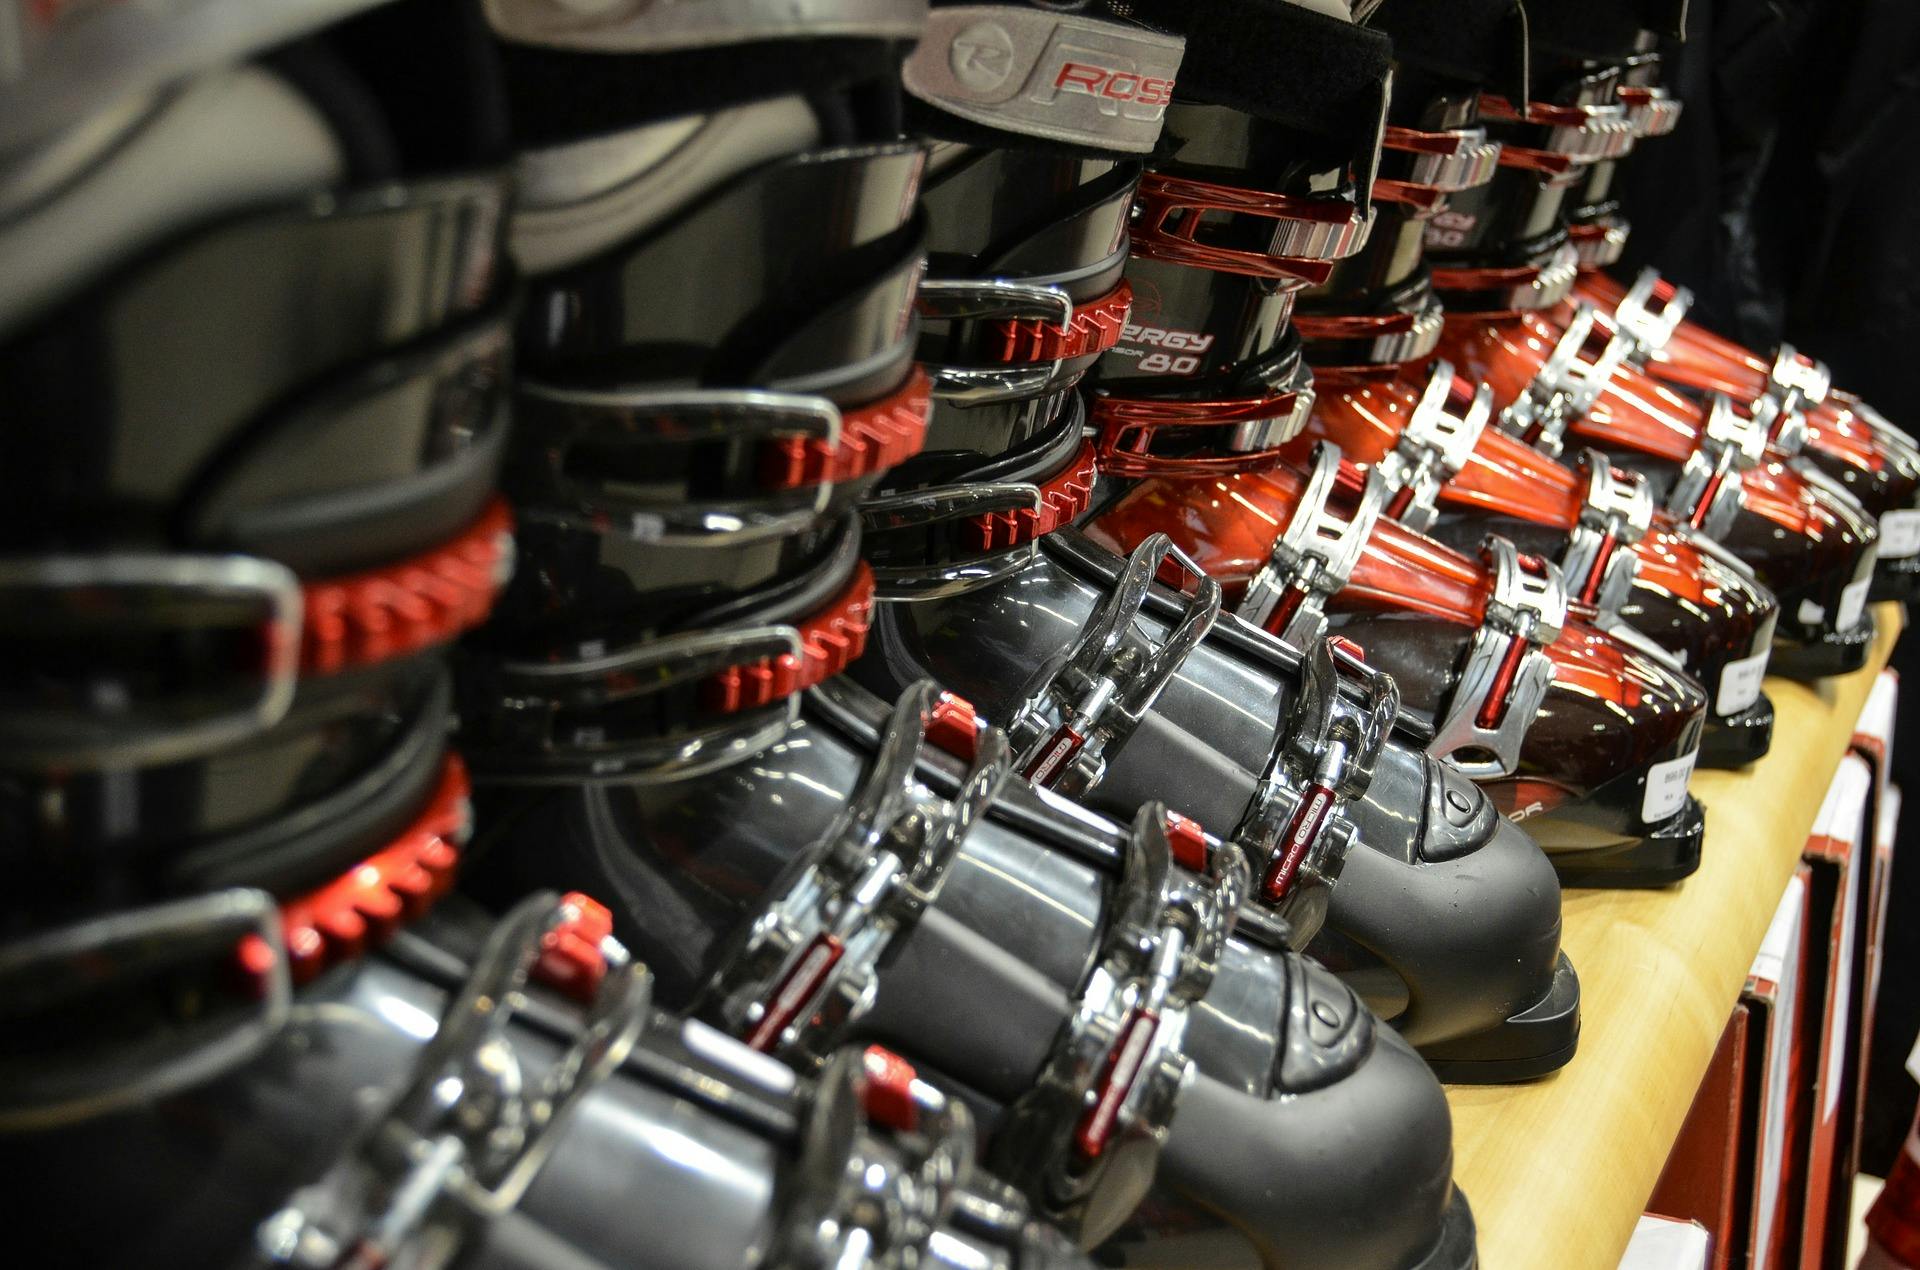 A line of ski boots in a store.